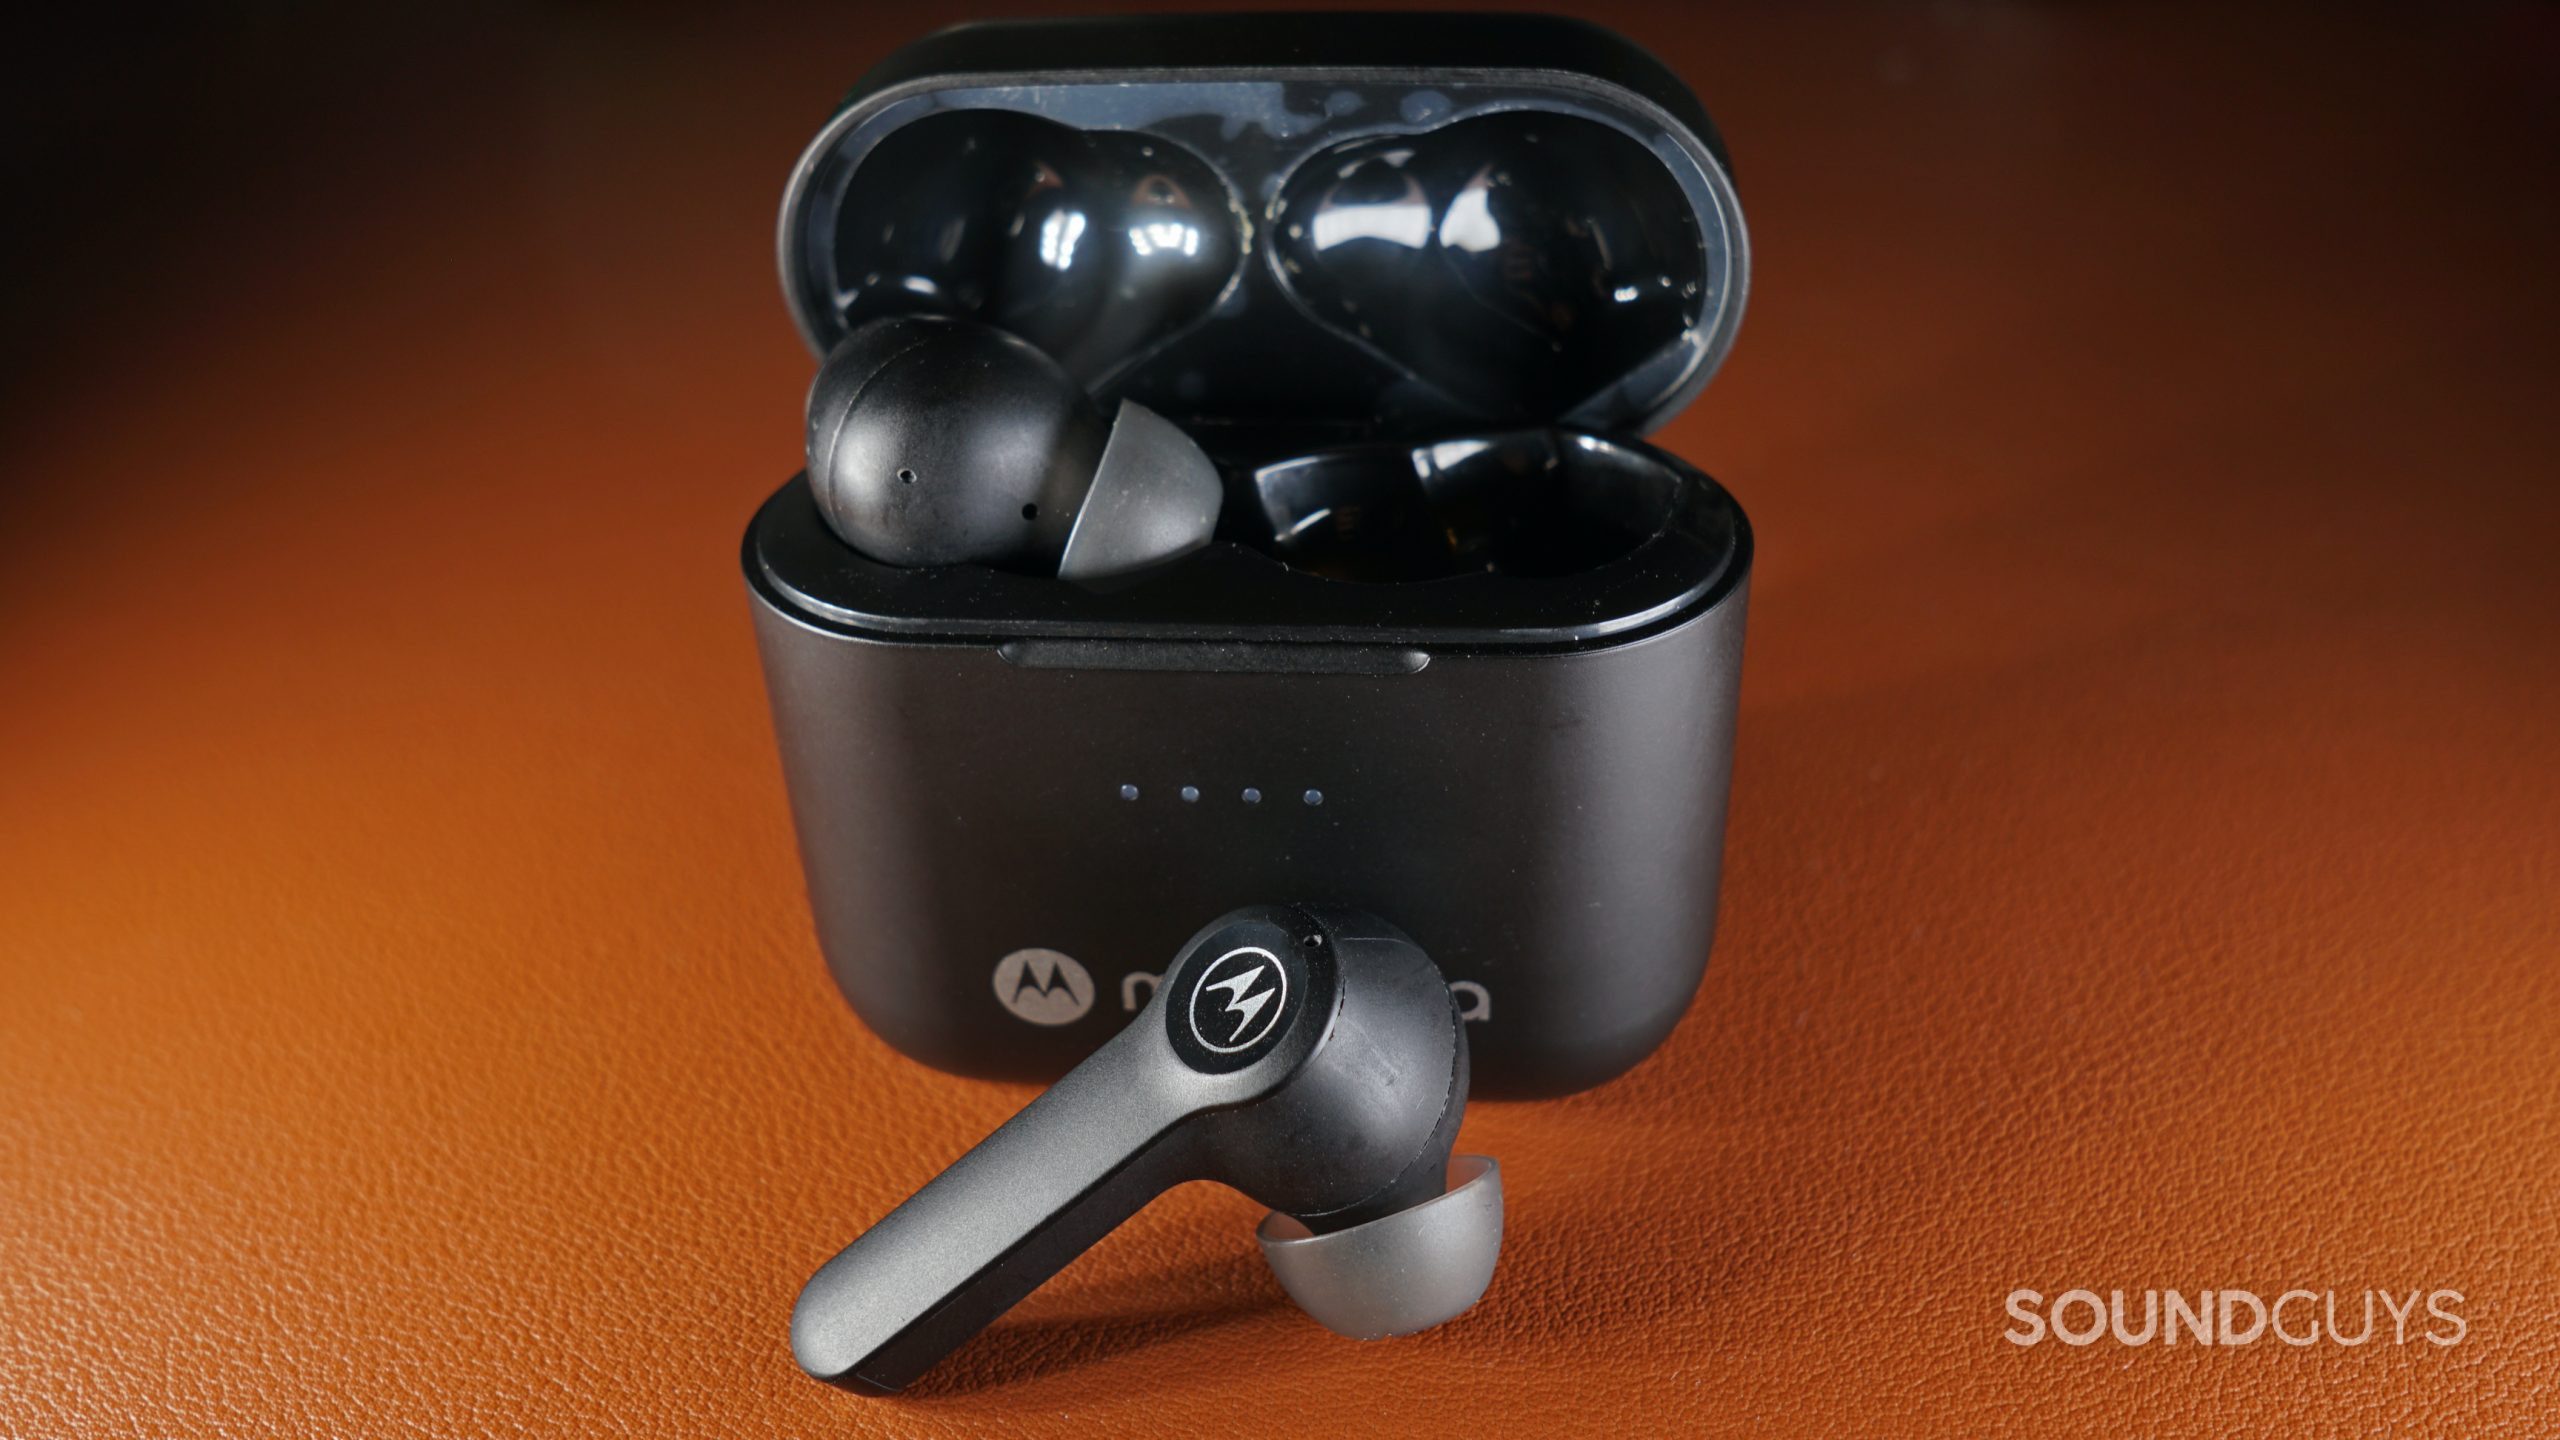 The Motorola Moto Buds-S ANC sits on a leather surface with one earbud out of the charging case.